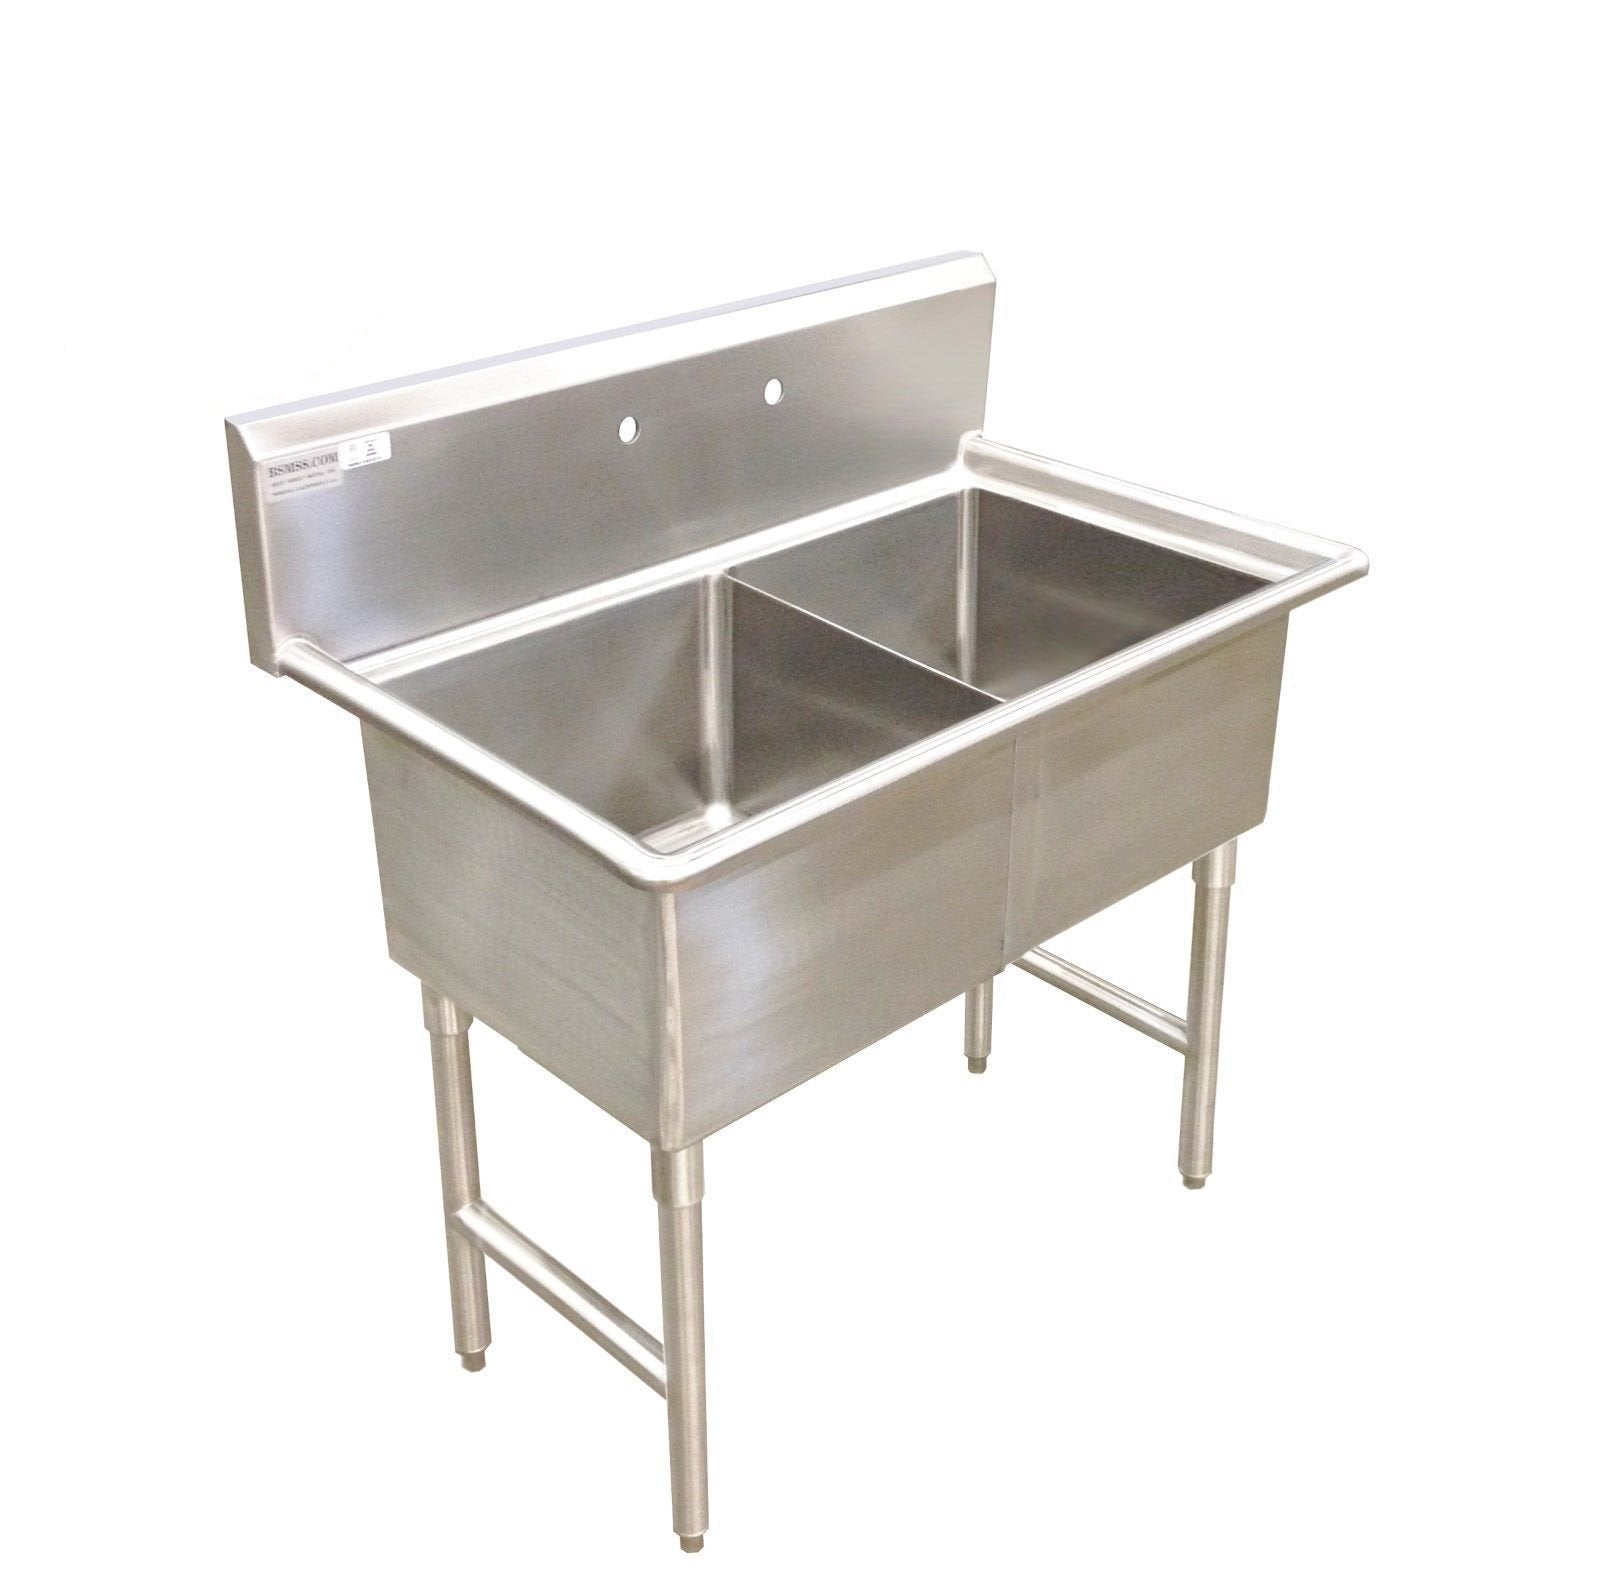 Stainless Steel Heavy Duty 2 Compartment Restaurant Commercial Sink 40 1 2 S4024 181812 2n